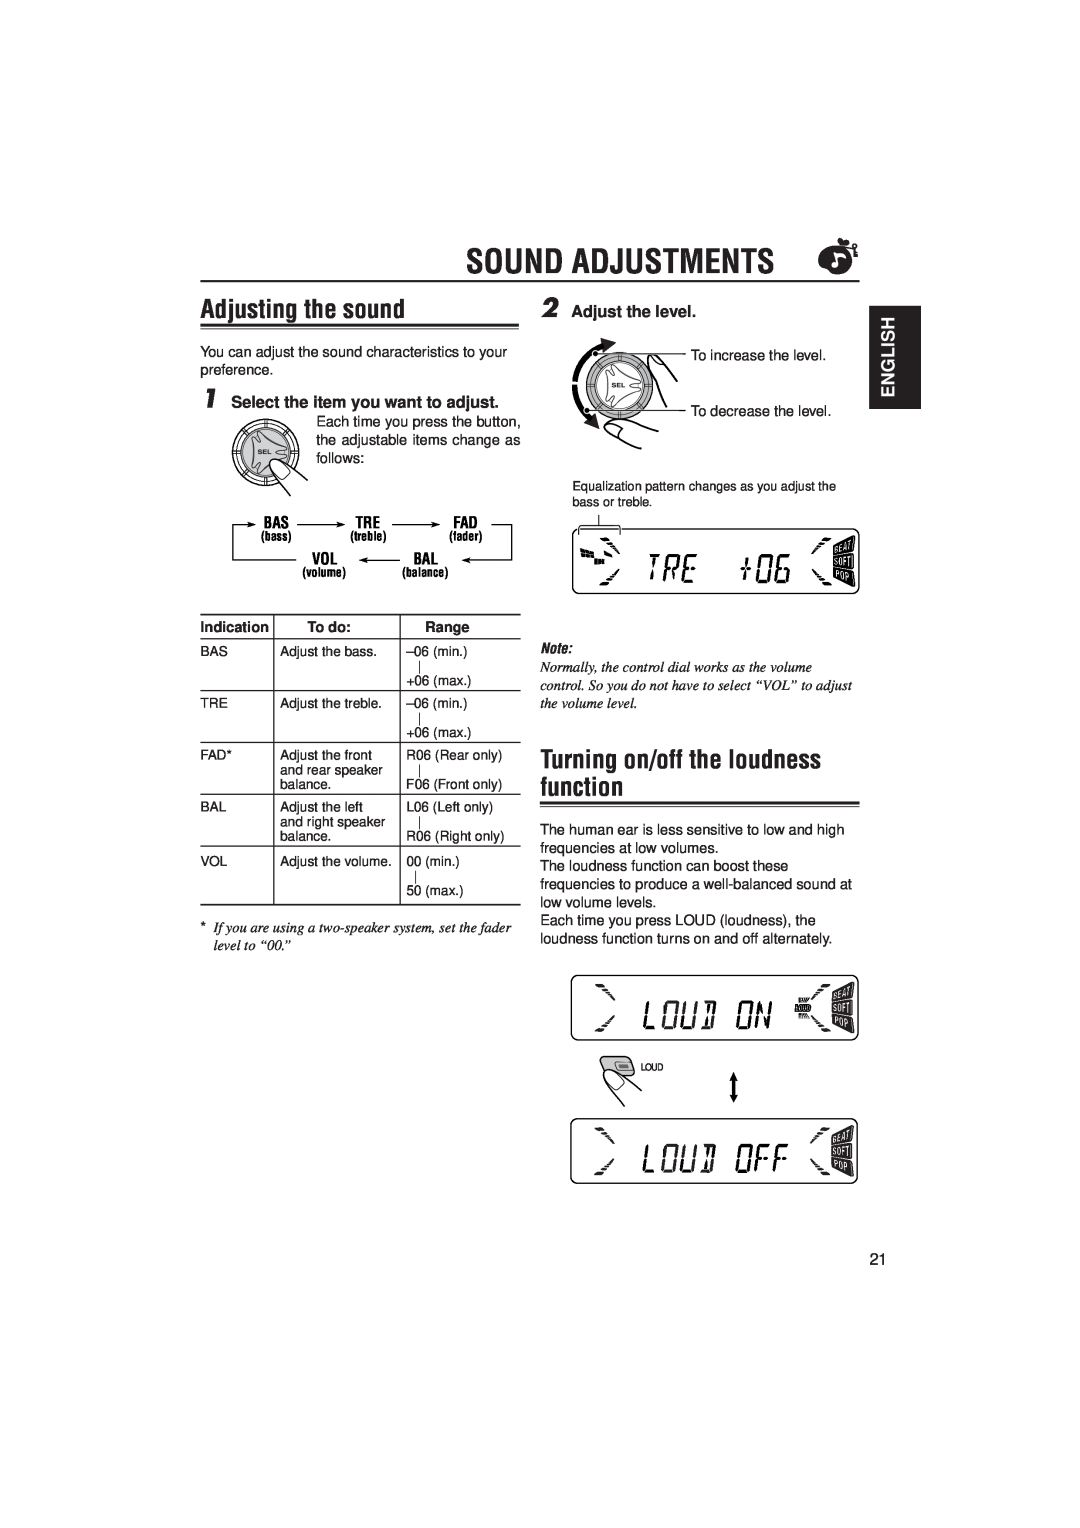 JVC KD-S785 manual Sound Adjustments, Adjusting the sound, Turning on/off the loudness function, Adjust the level, English 